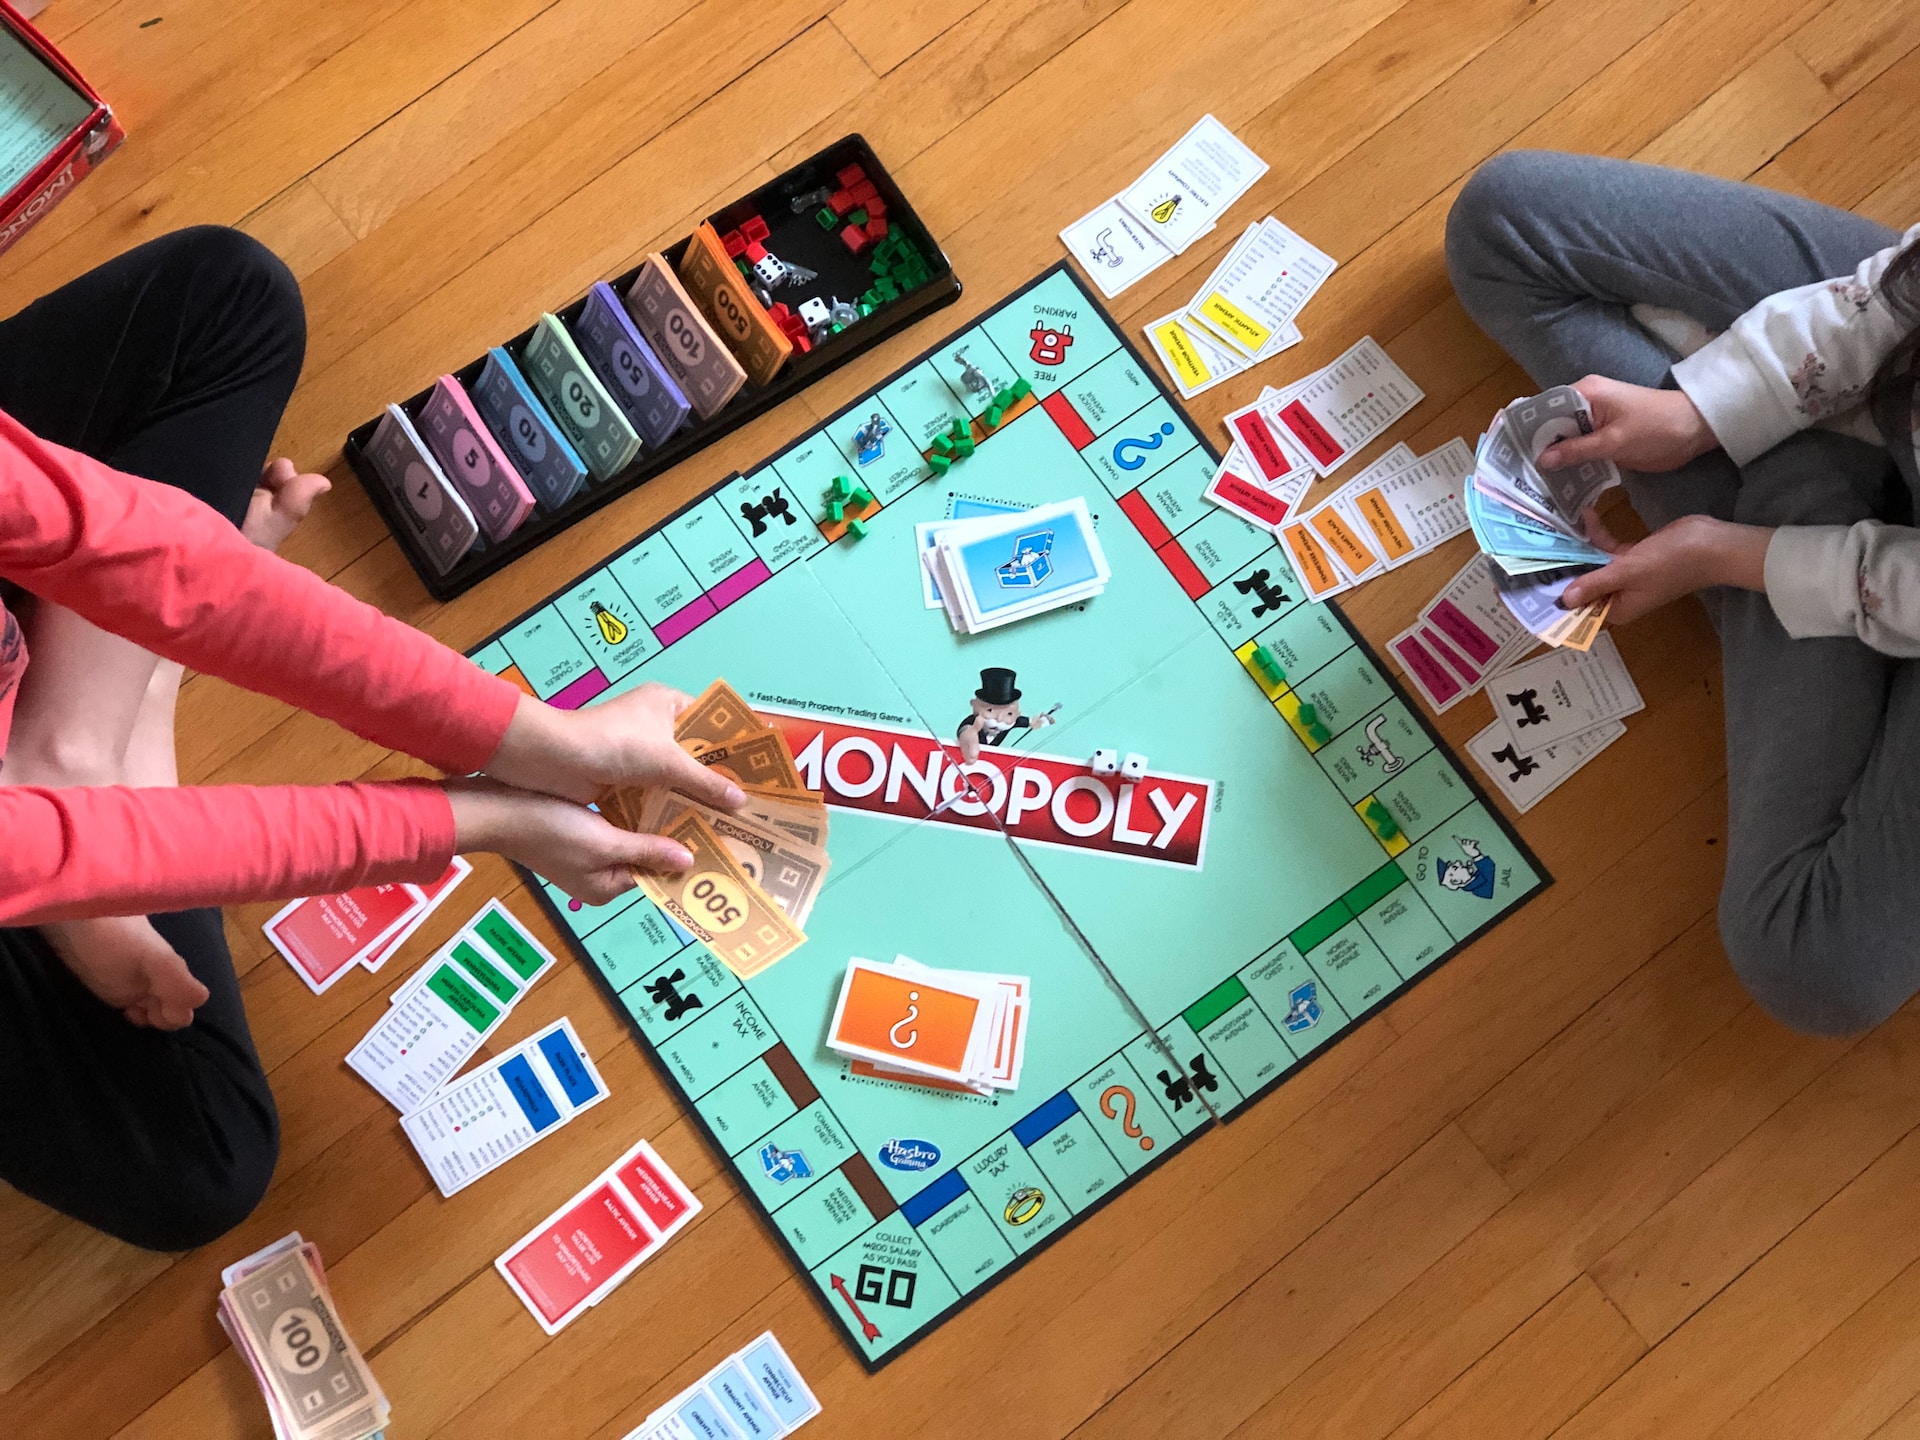 Two people sitting in front of a Monopoly board